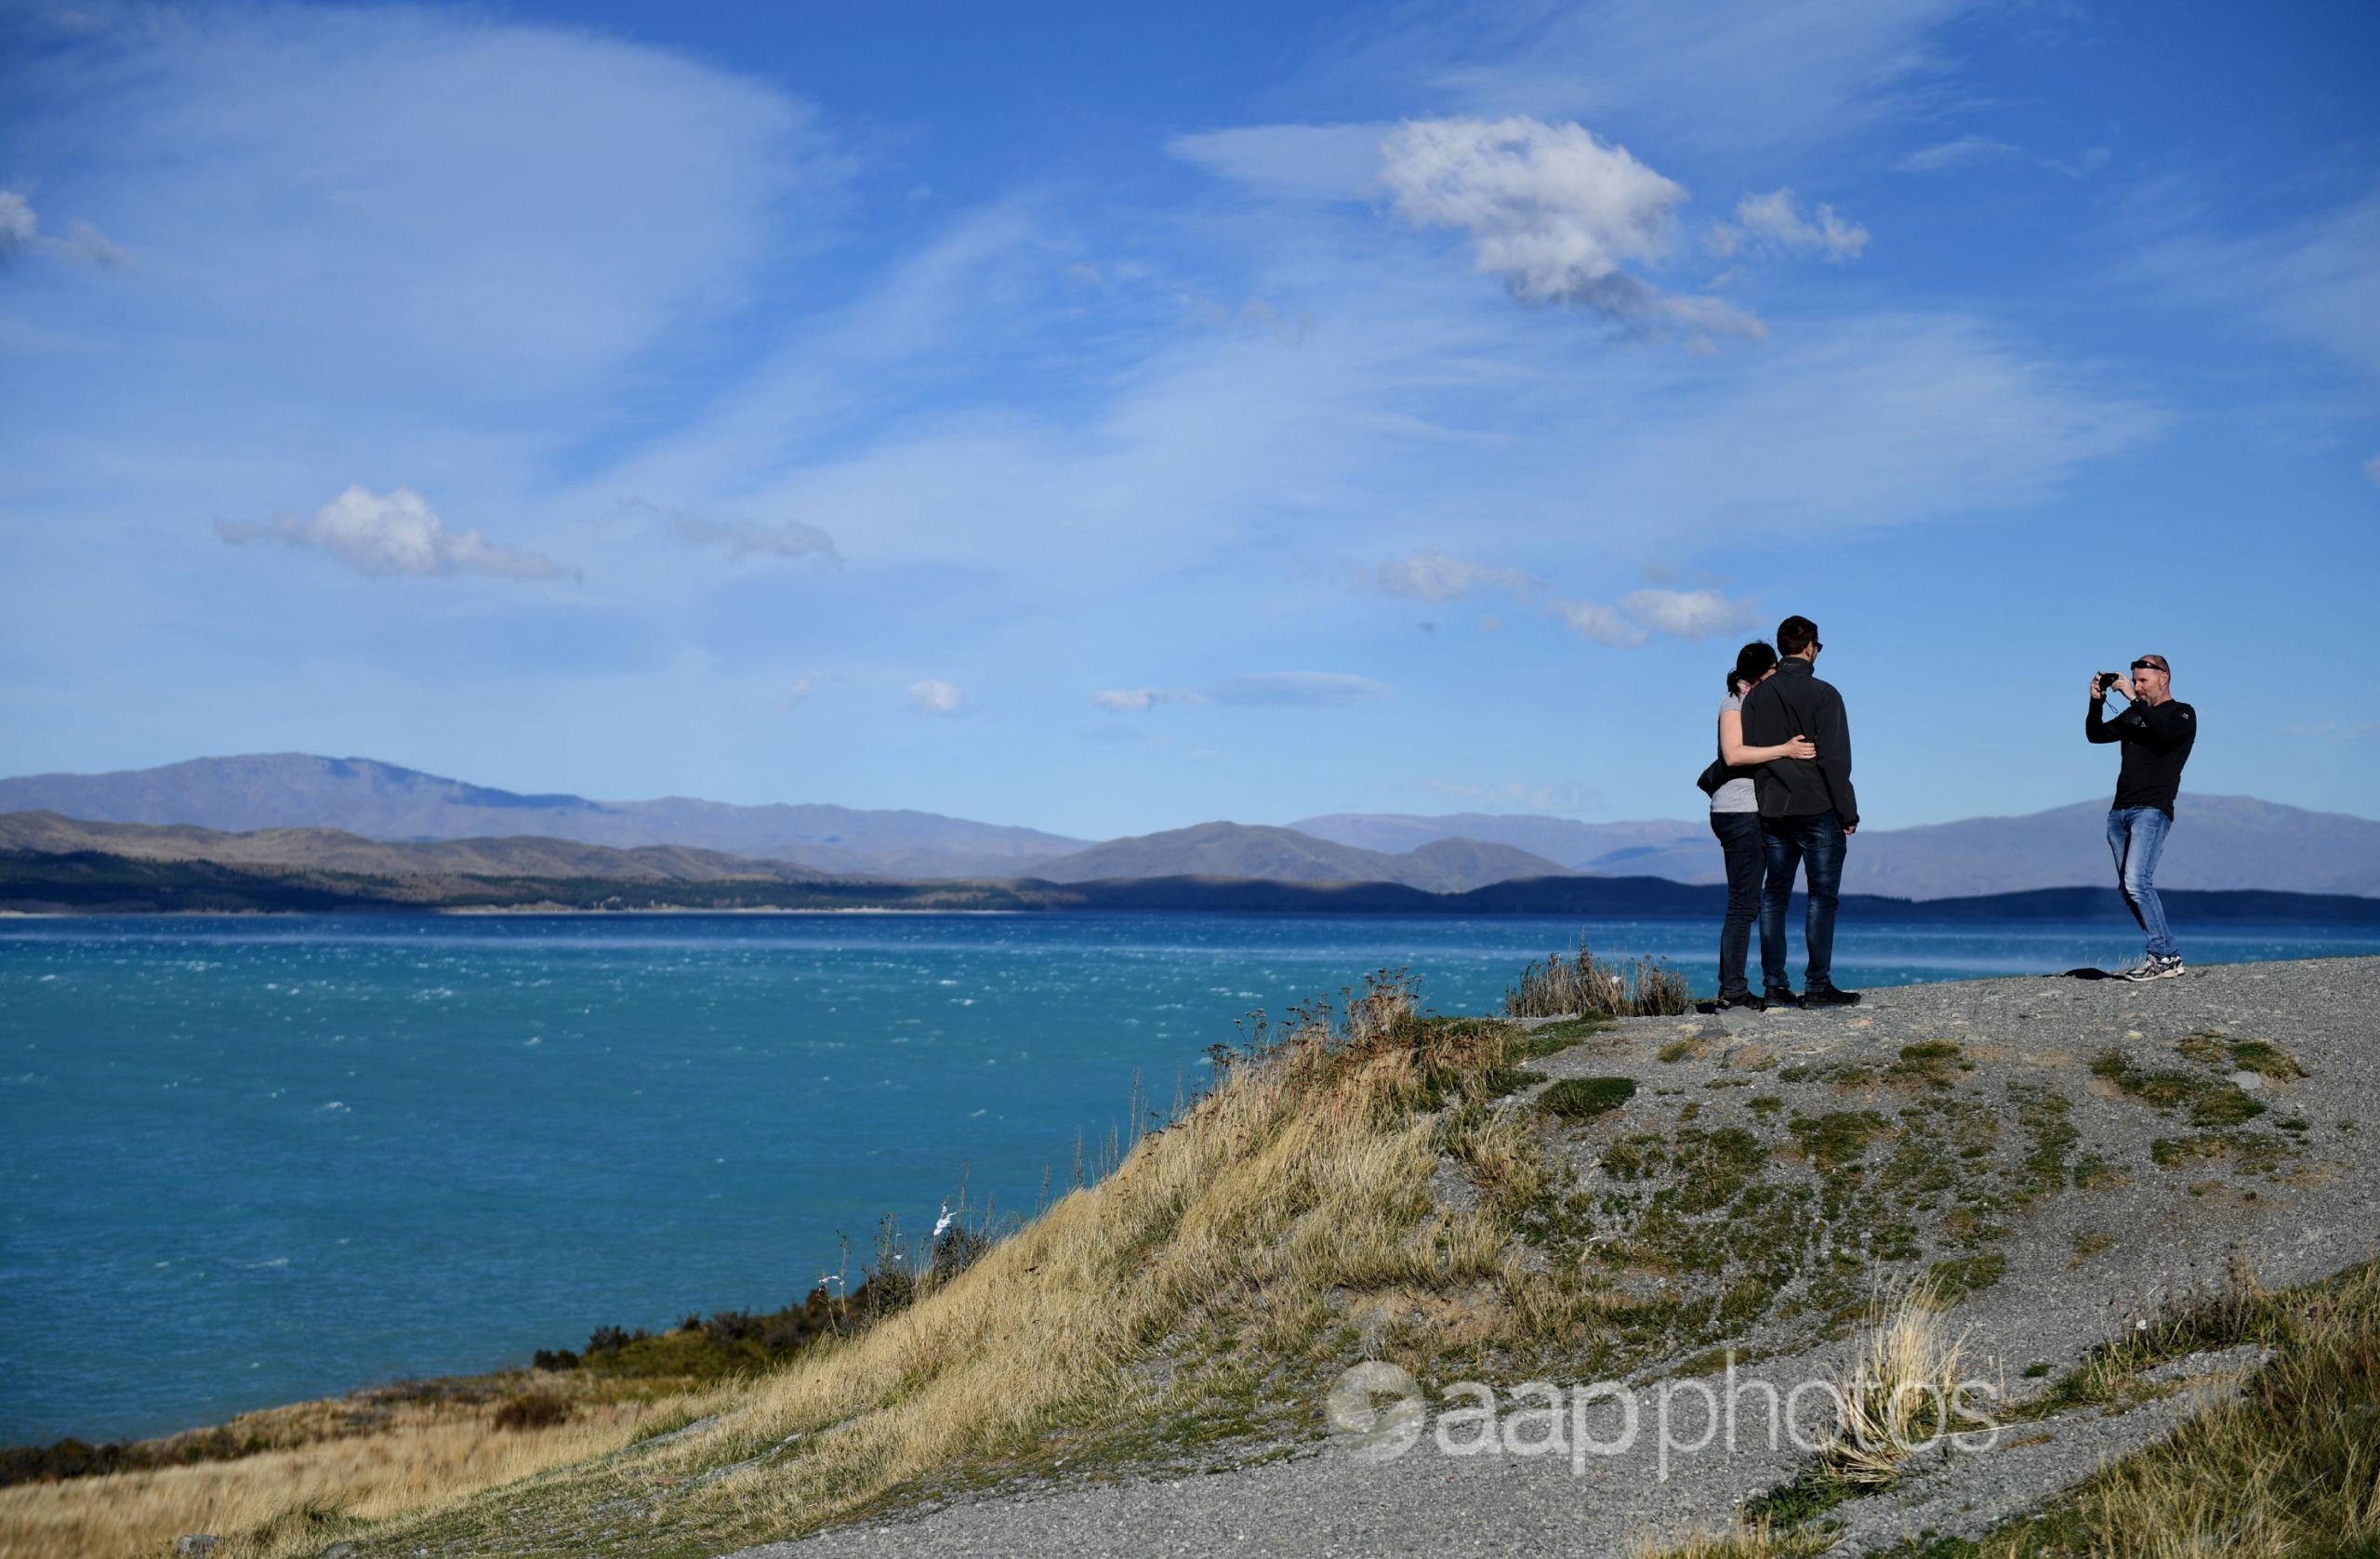 Couple has their photo taken on the shore of a lake in NZ